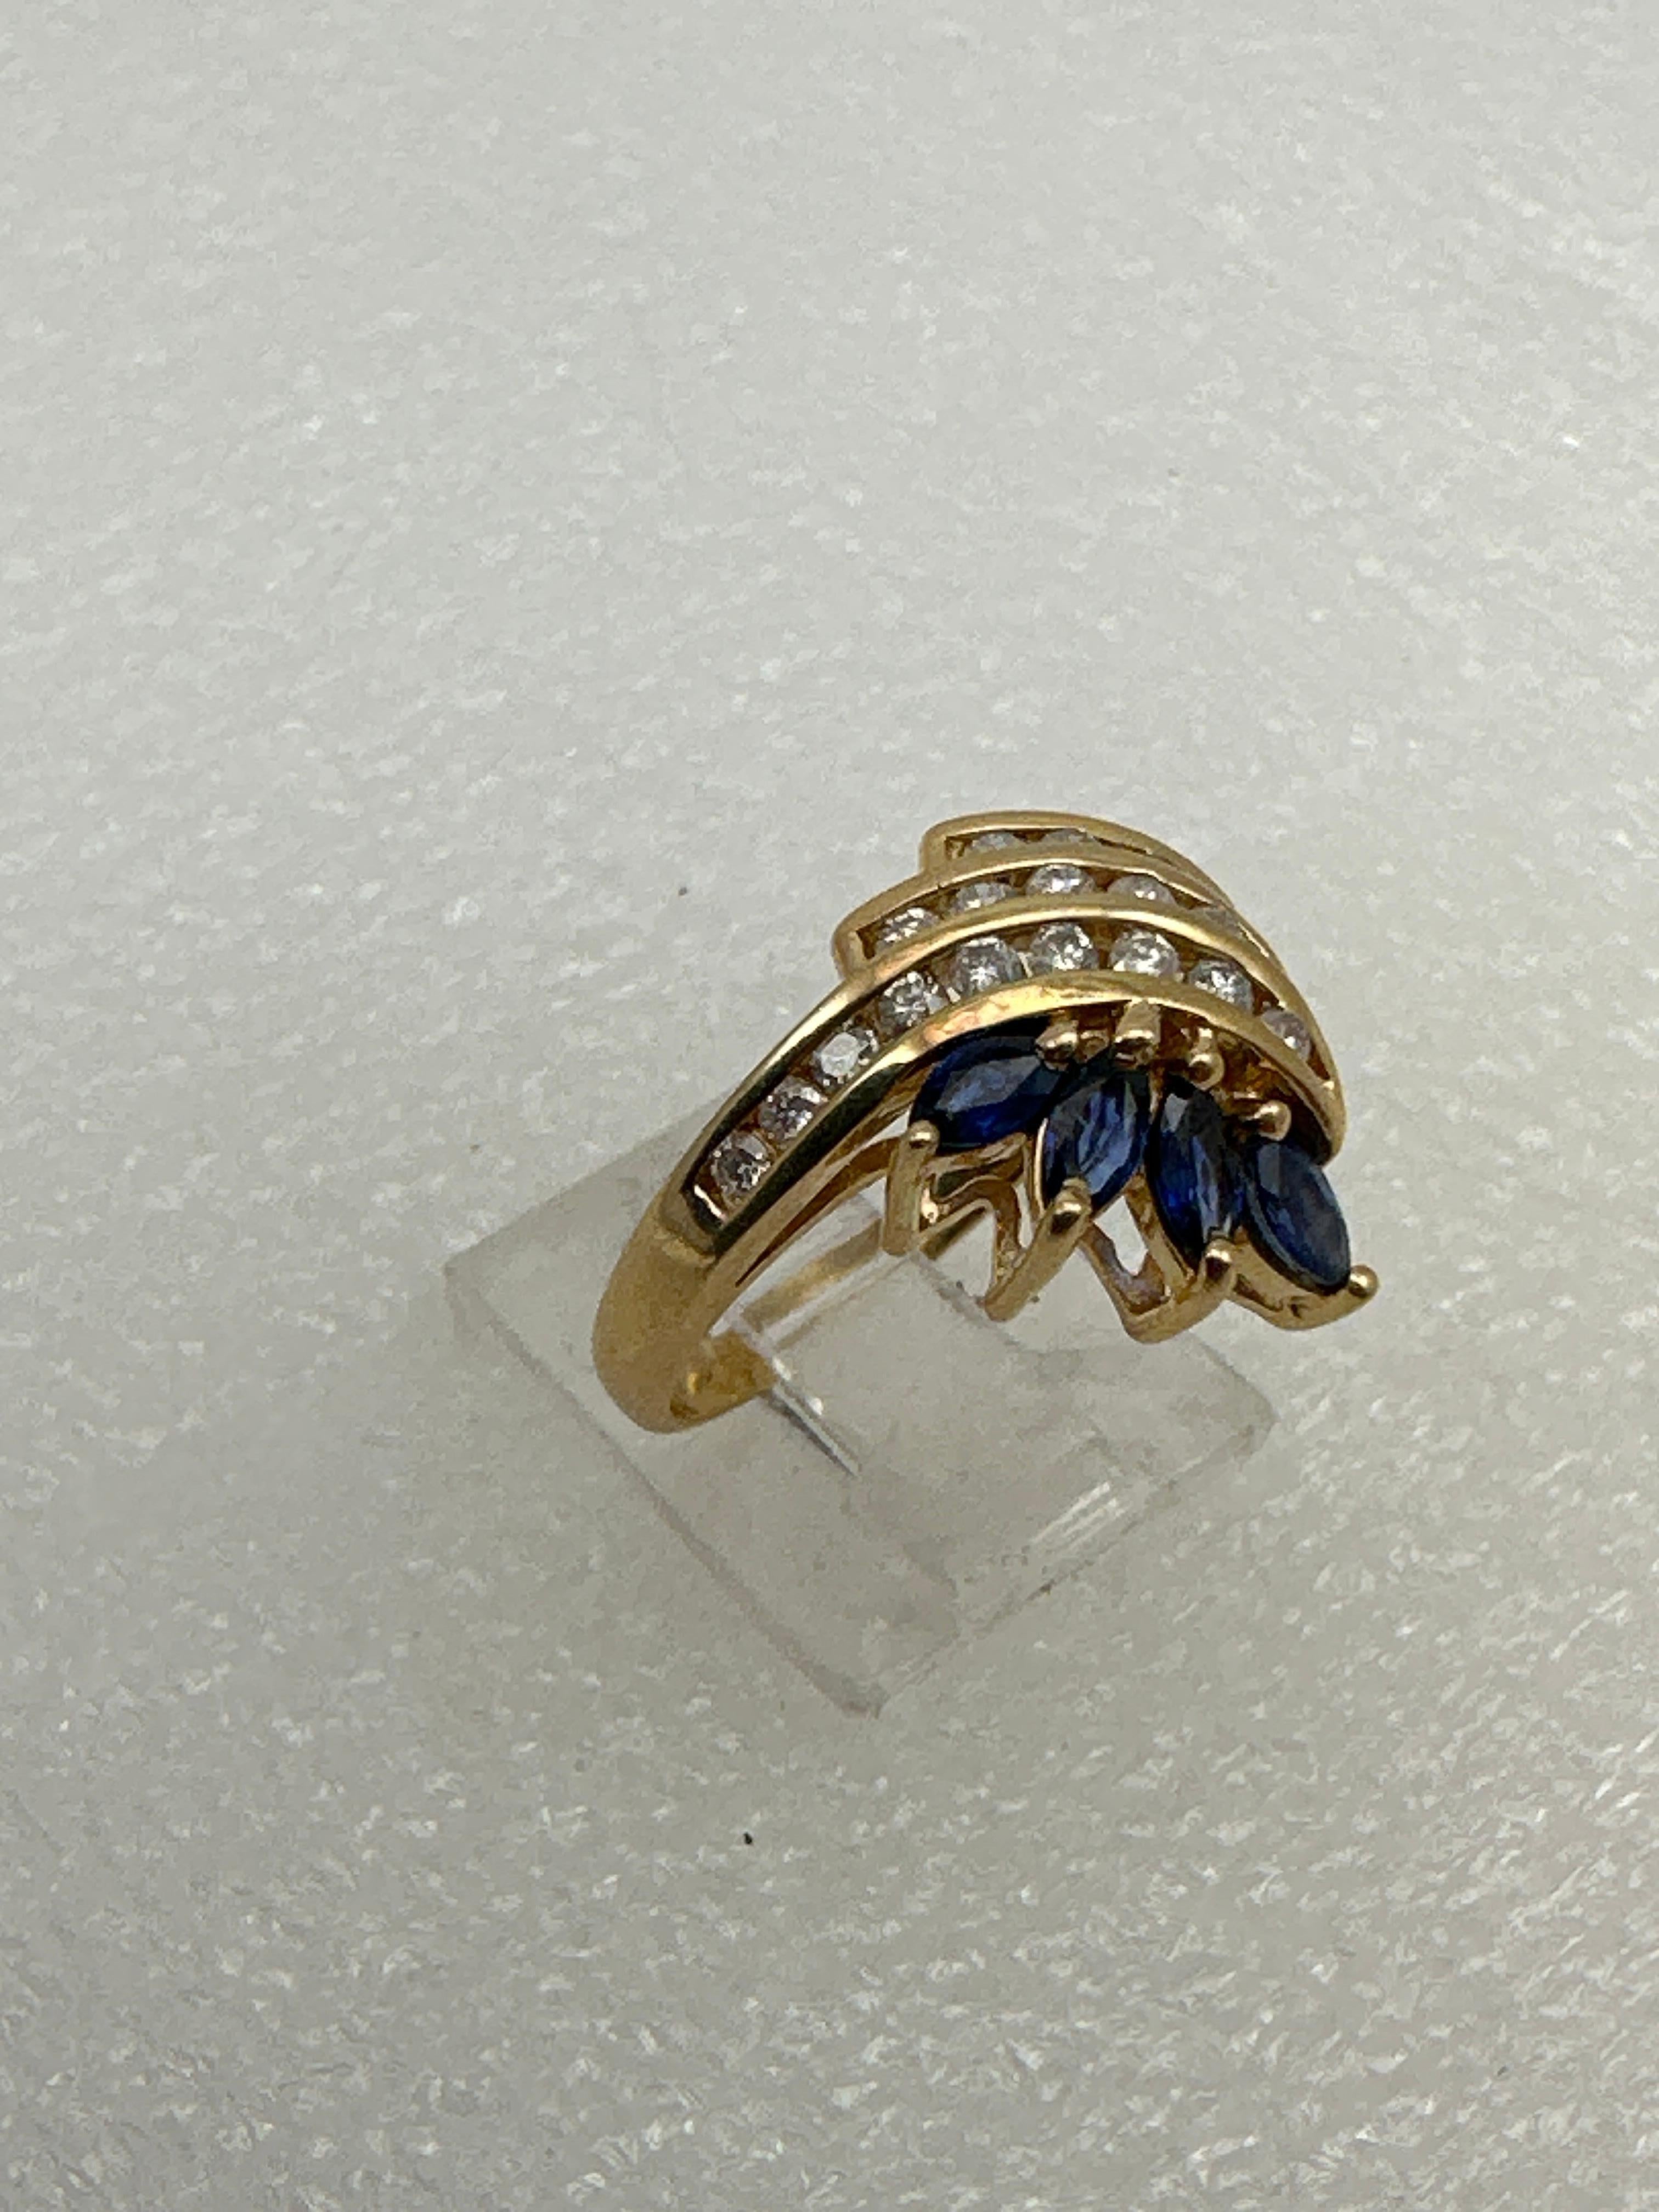 14k Yellow Gold ~ Marquise Sapphires Round Diamonds Cocktail Ring ~ Sz 6 3/4
Sapphire measure approx 2.5mm x 4.5mm
20 round diamonds 

Sapphire is the birthstone for the month of September and is mostly known as the wisdom stone. It is meant to